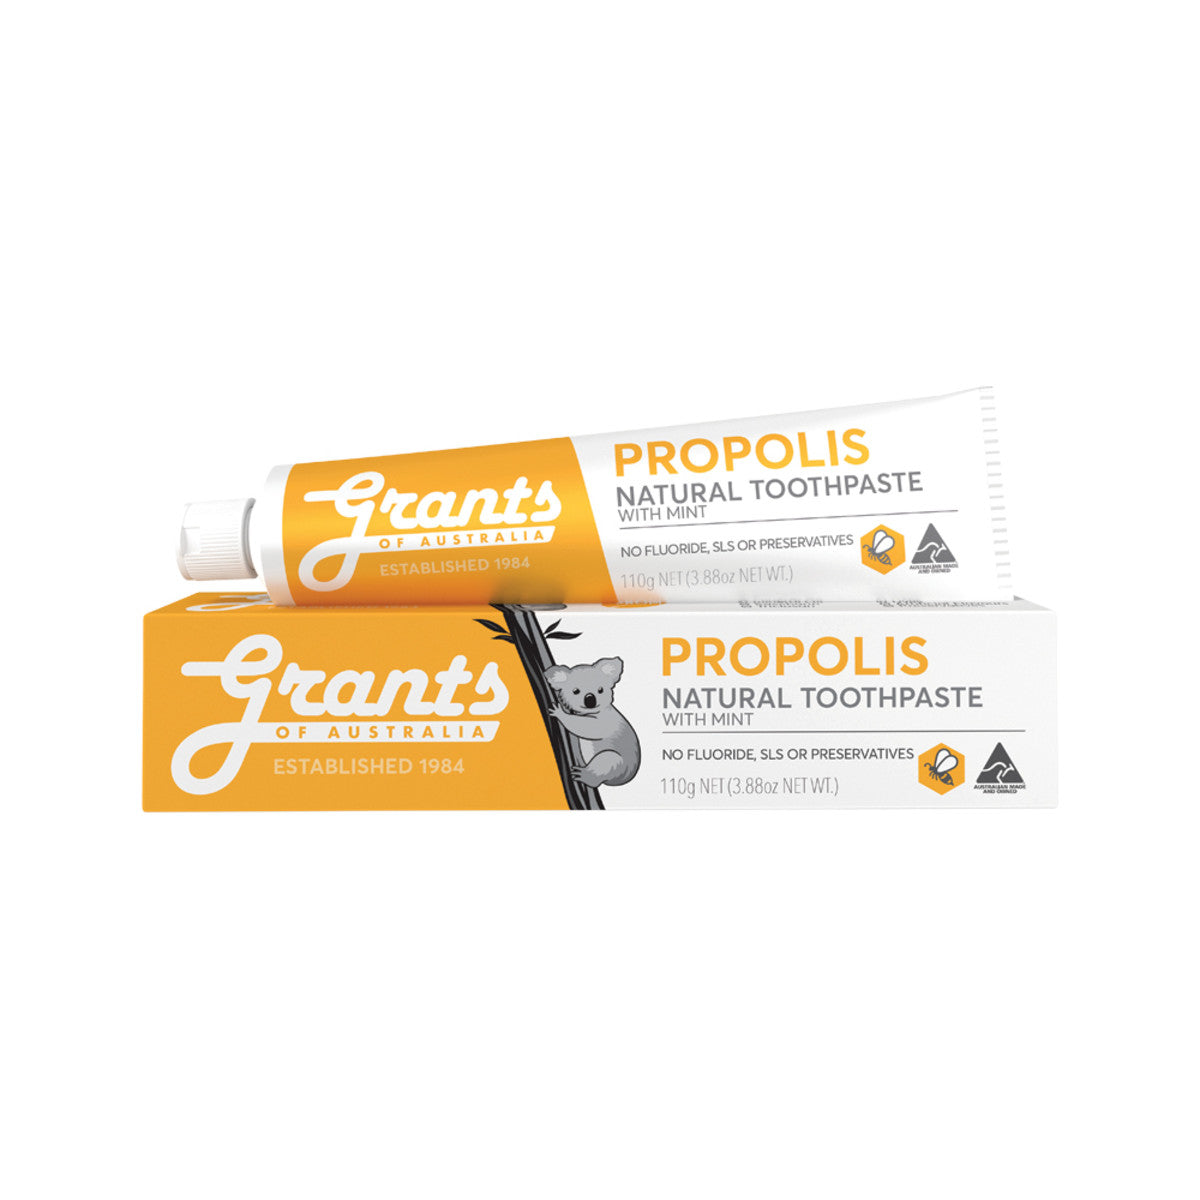 Grants - Natural Toothpaste (Propolis with Mint)